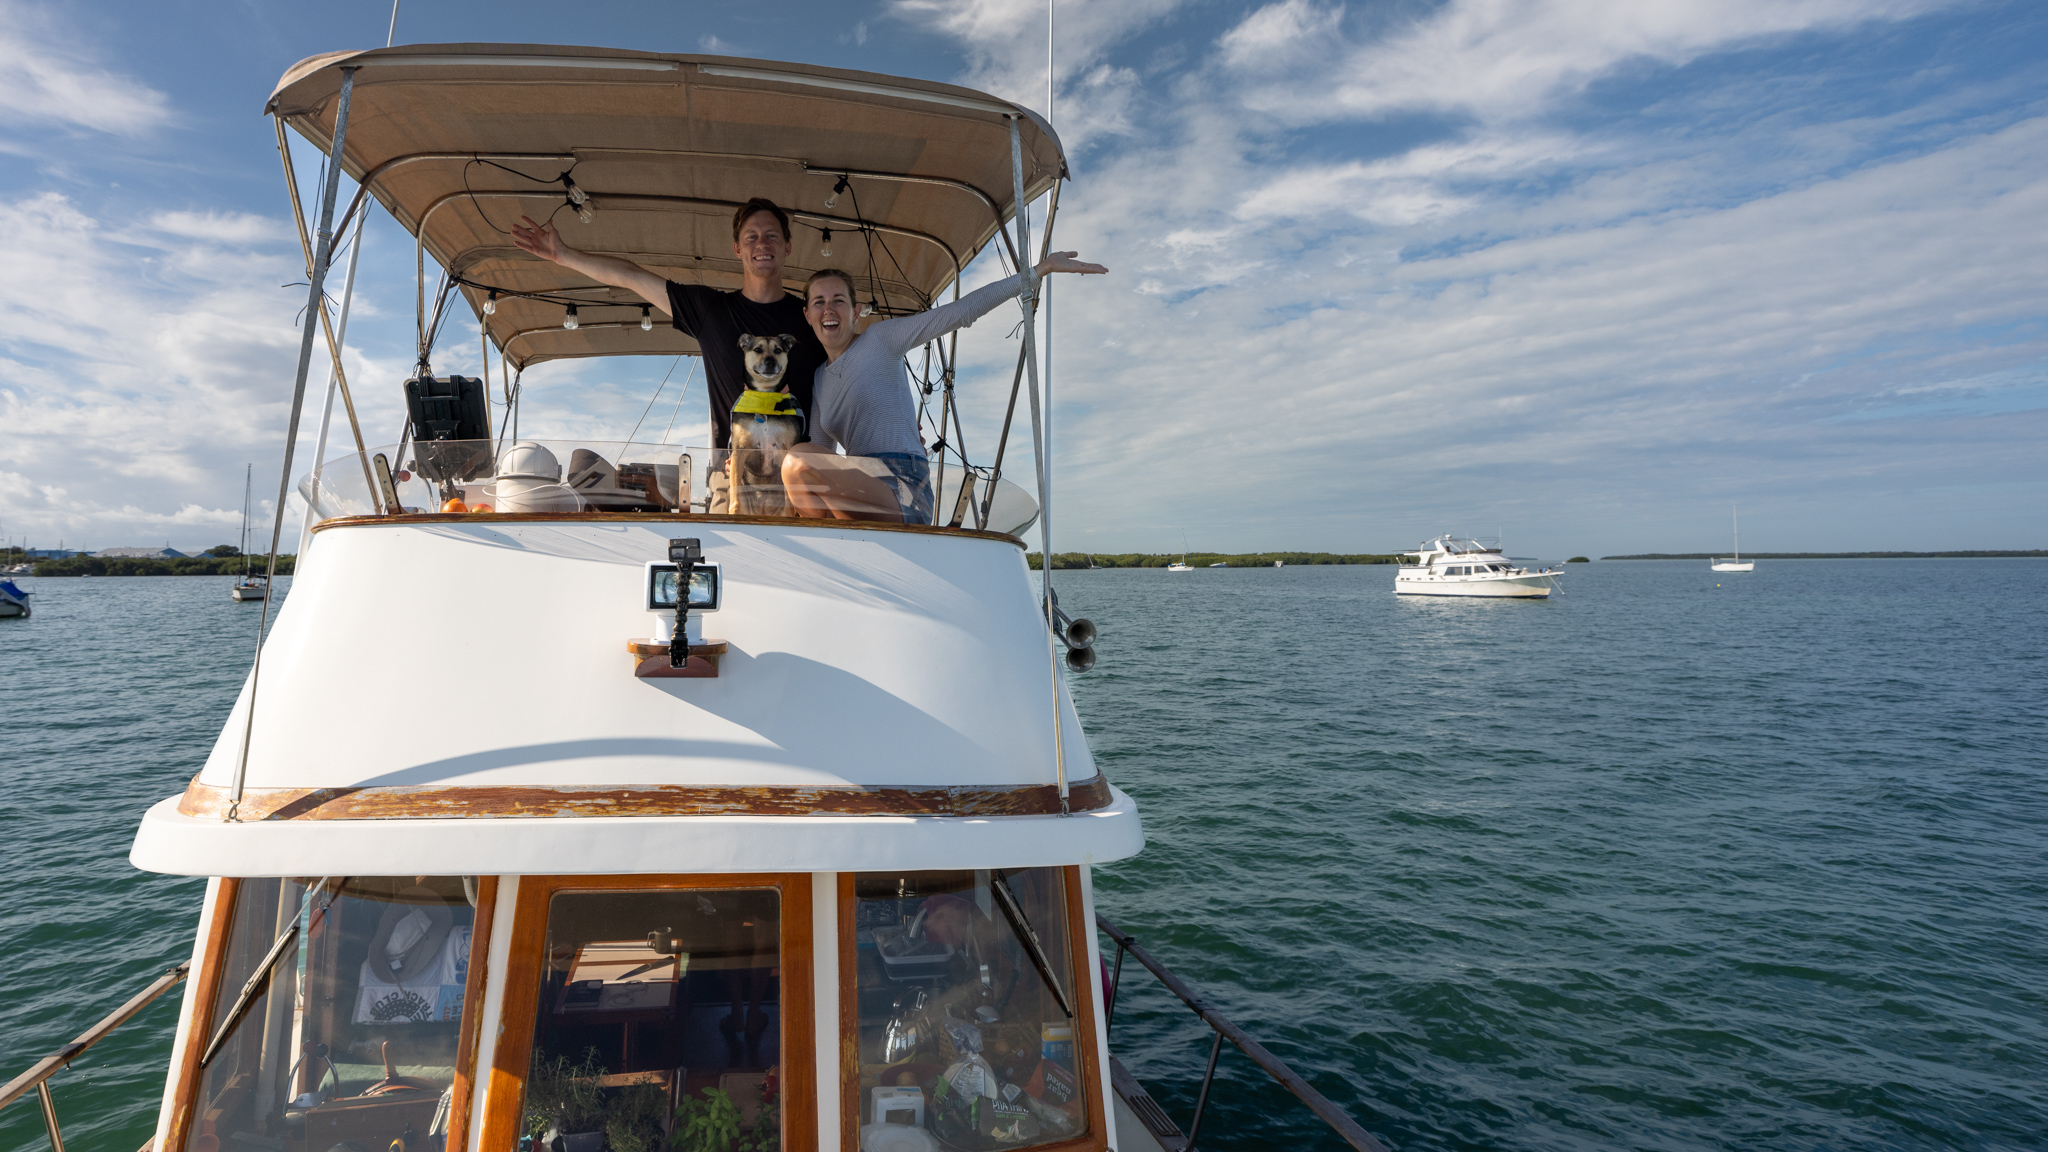 What we’ve learned from owning a boat for a year